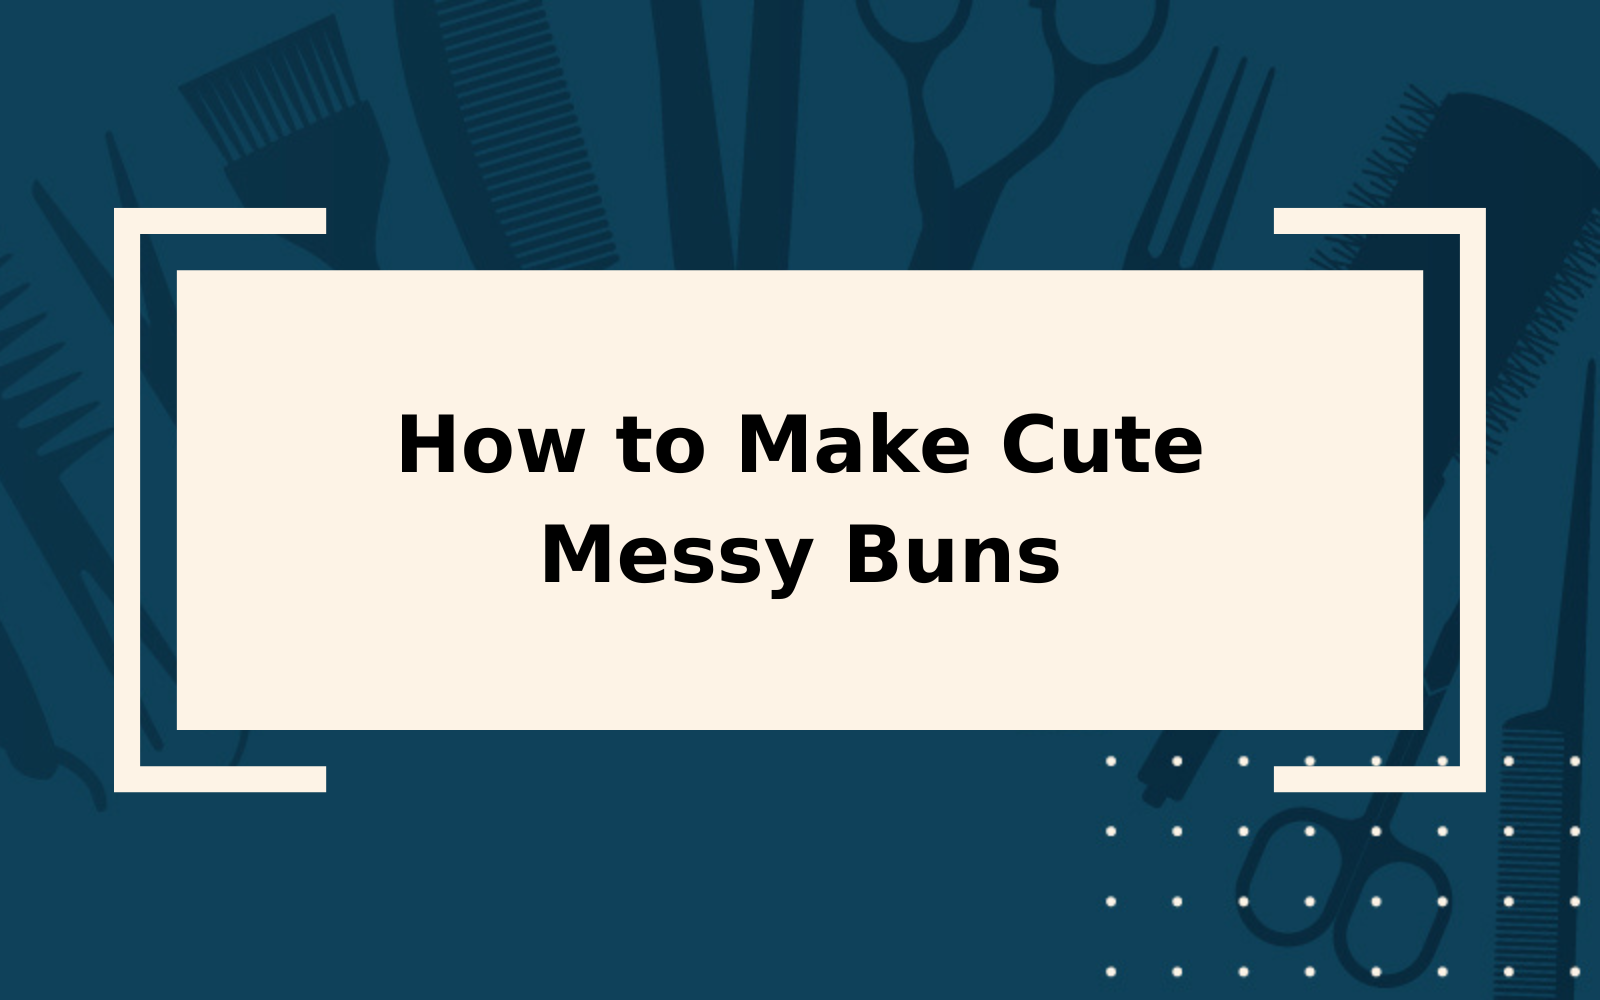 How to Make Cute Messy Buns | Step-by-Step Guide